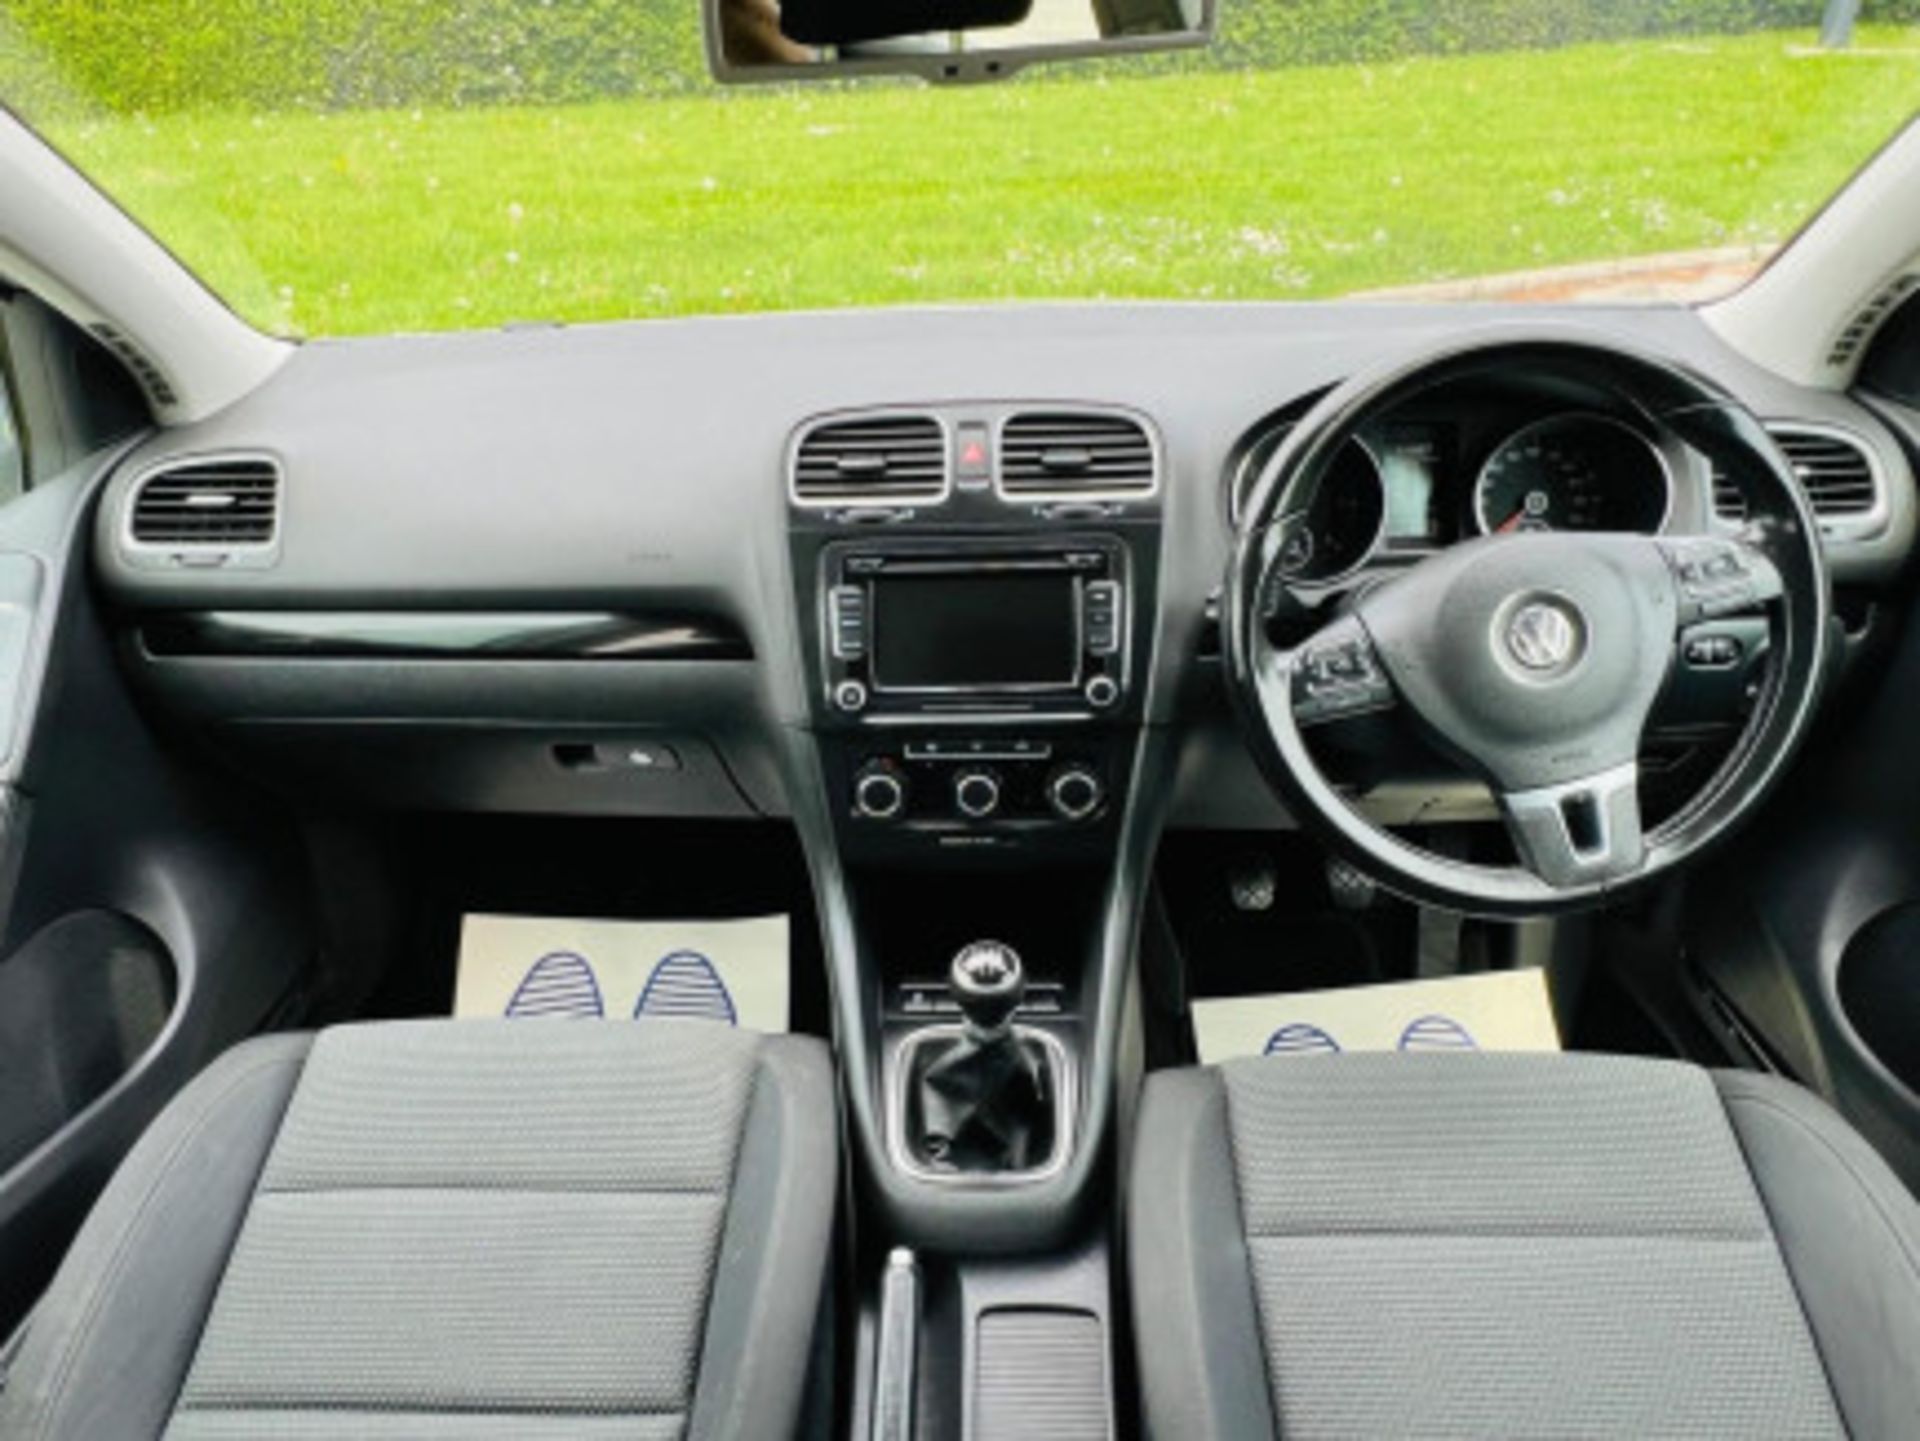 IMPECCABLE 2012 VOLKSWAGEN GOLF 1.6 TDI MATCH >>--NO VAT ON HAMMER--<< - Image 23 of 116